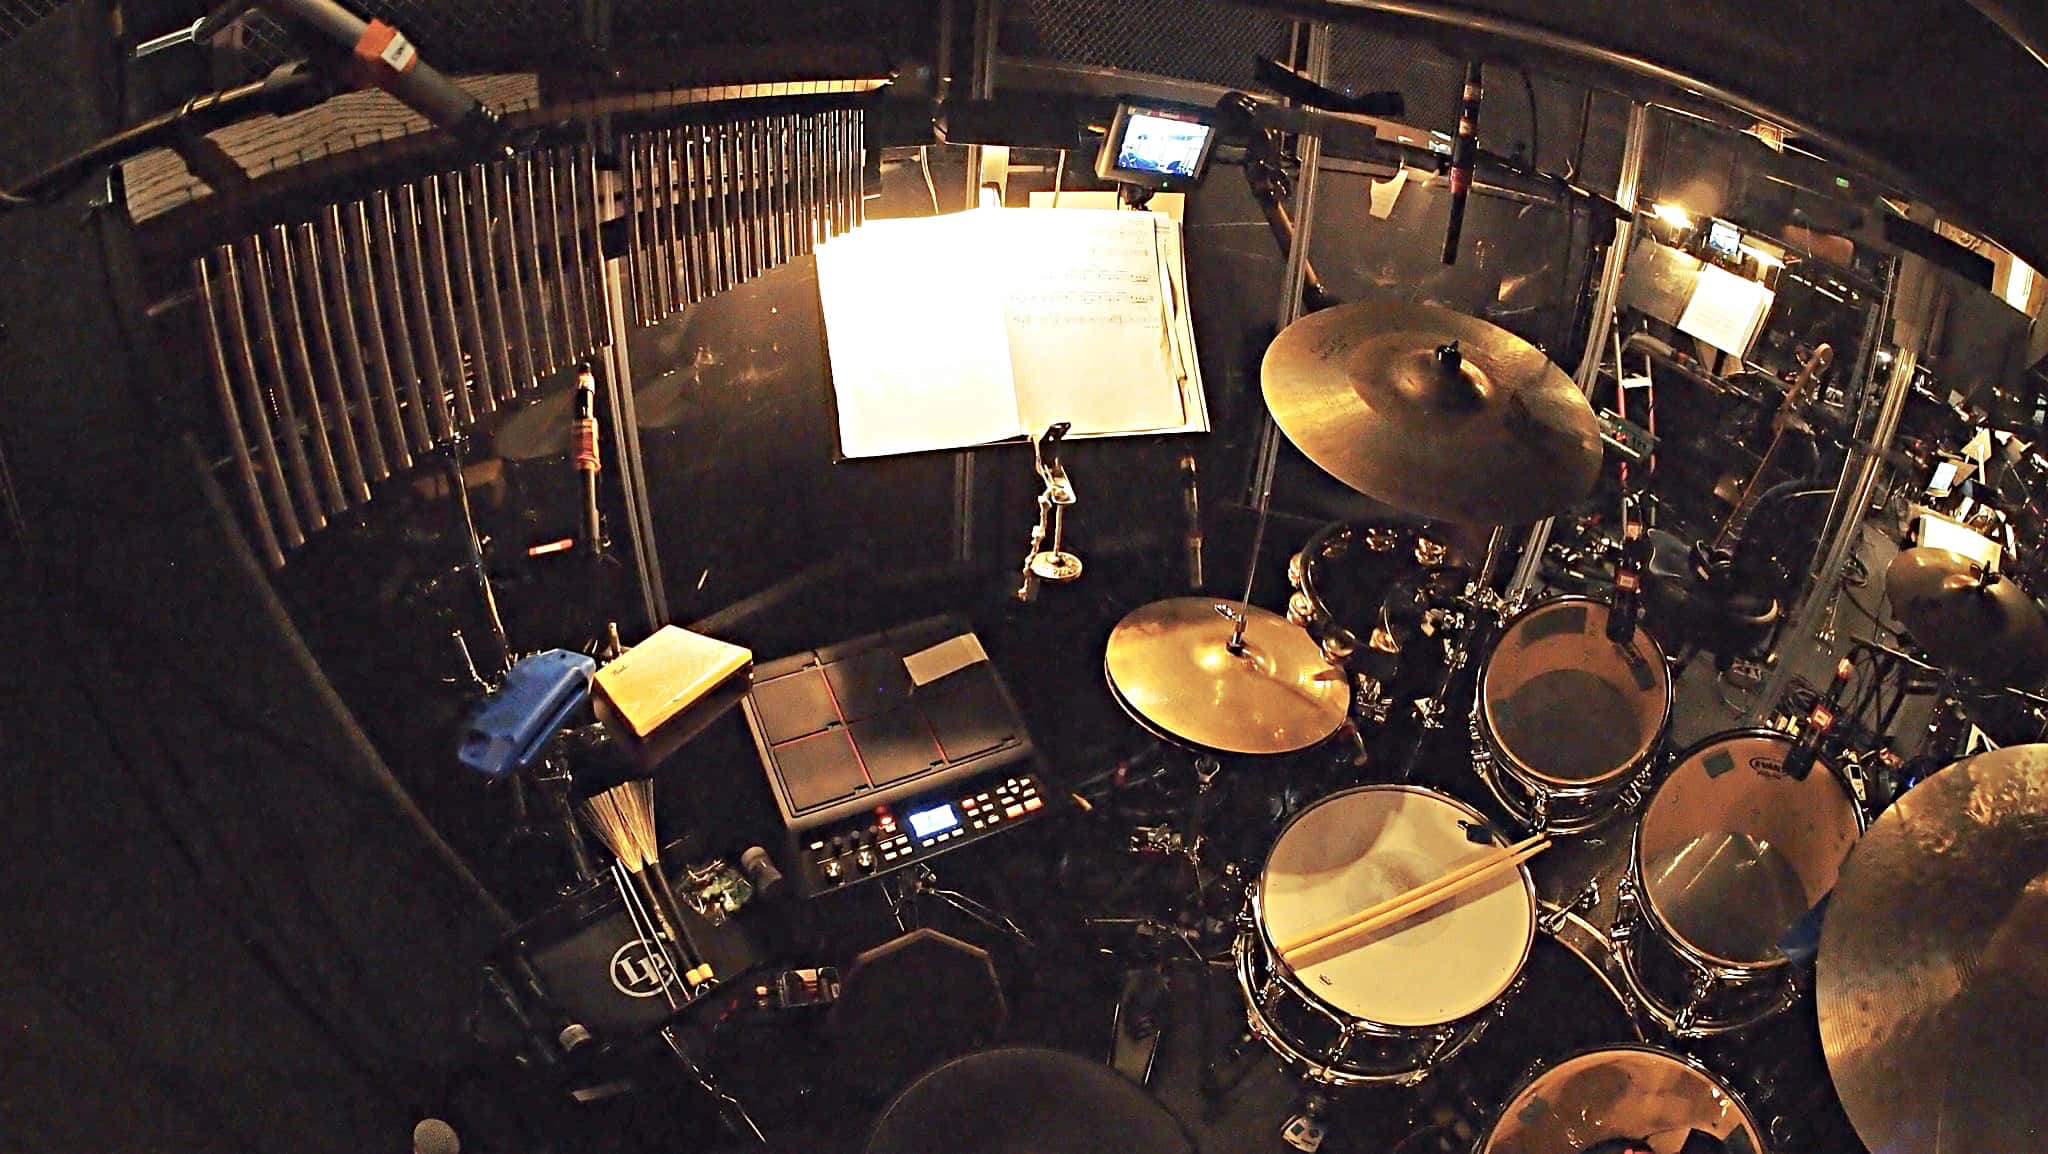 Greg Germann’s combined book setup for the National tour of the Broadway show Finding Neverland at the Paramount Theatre in Seattle, Washington.